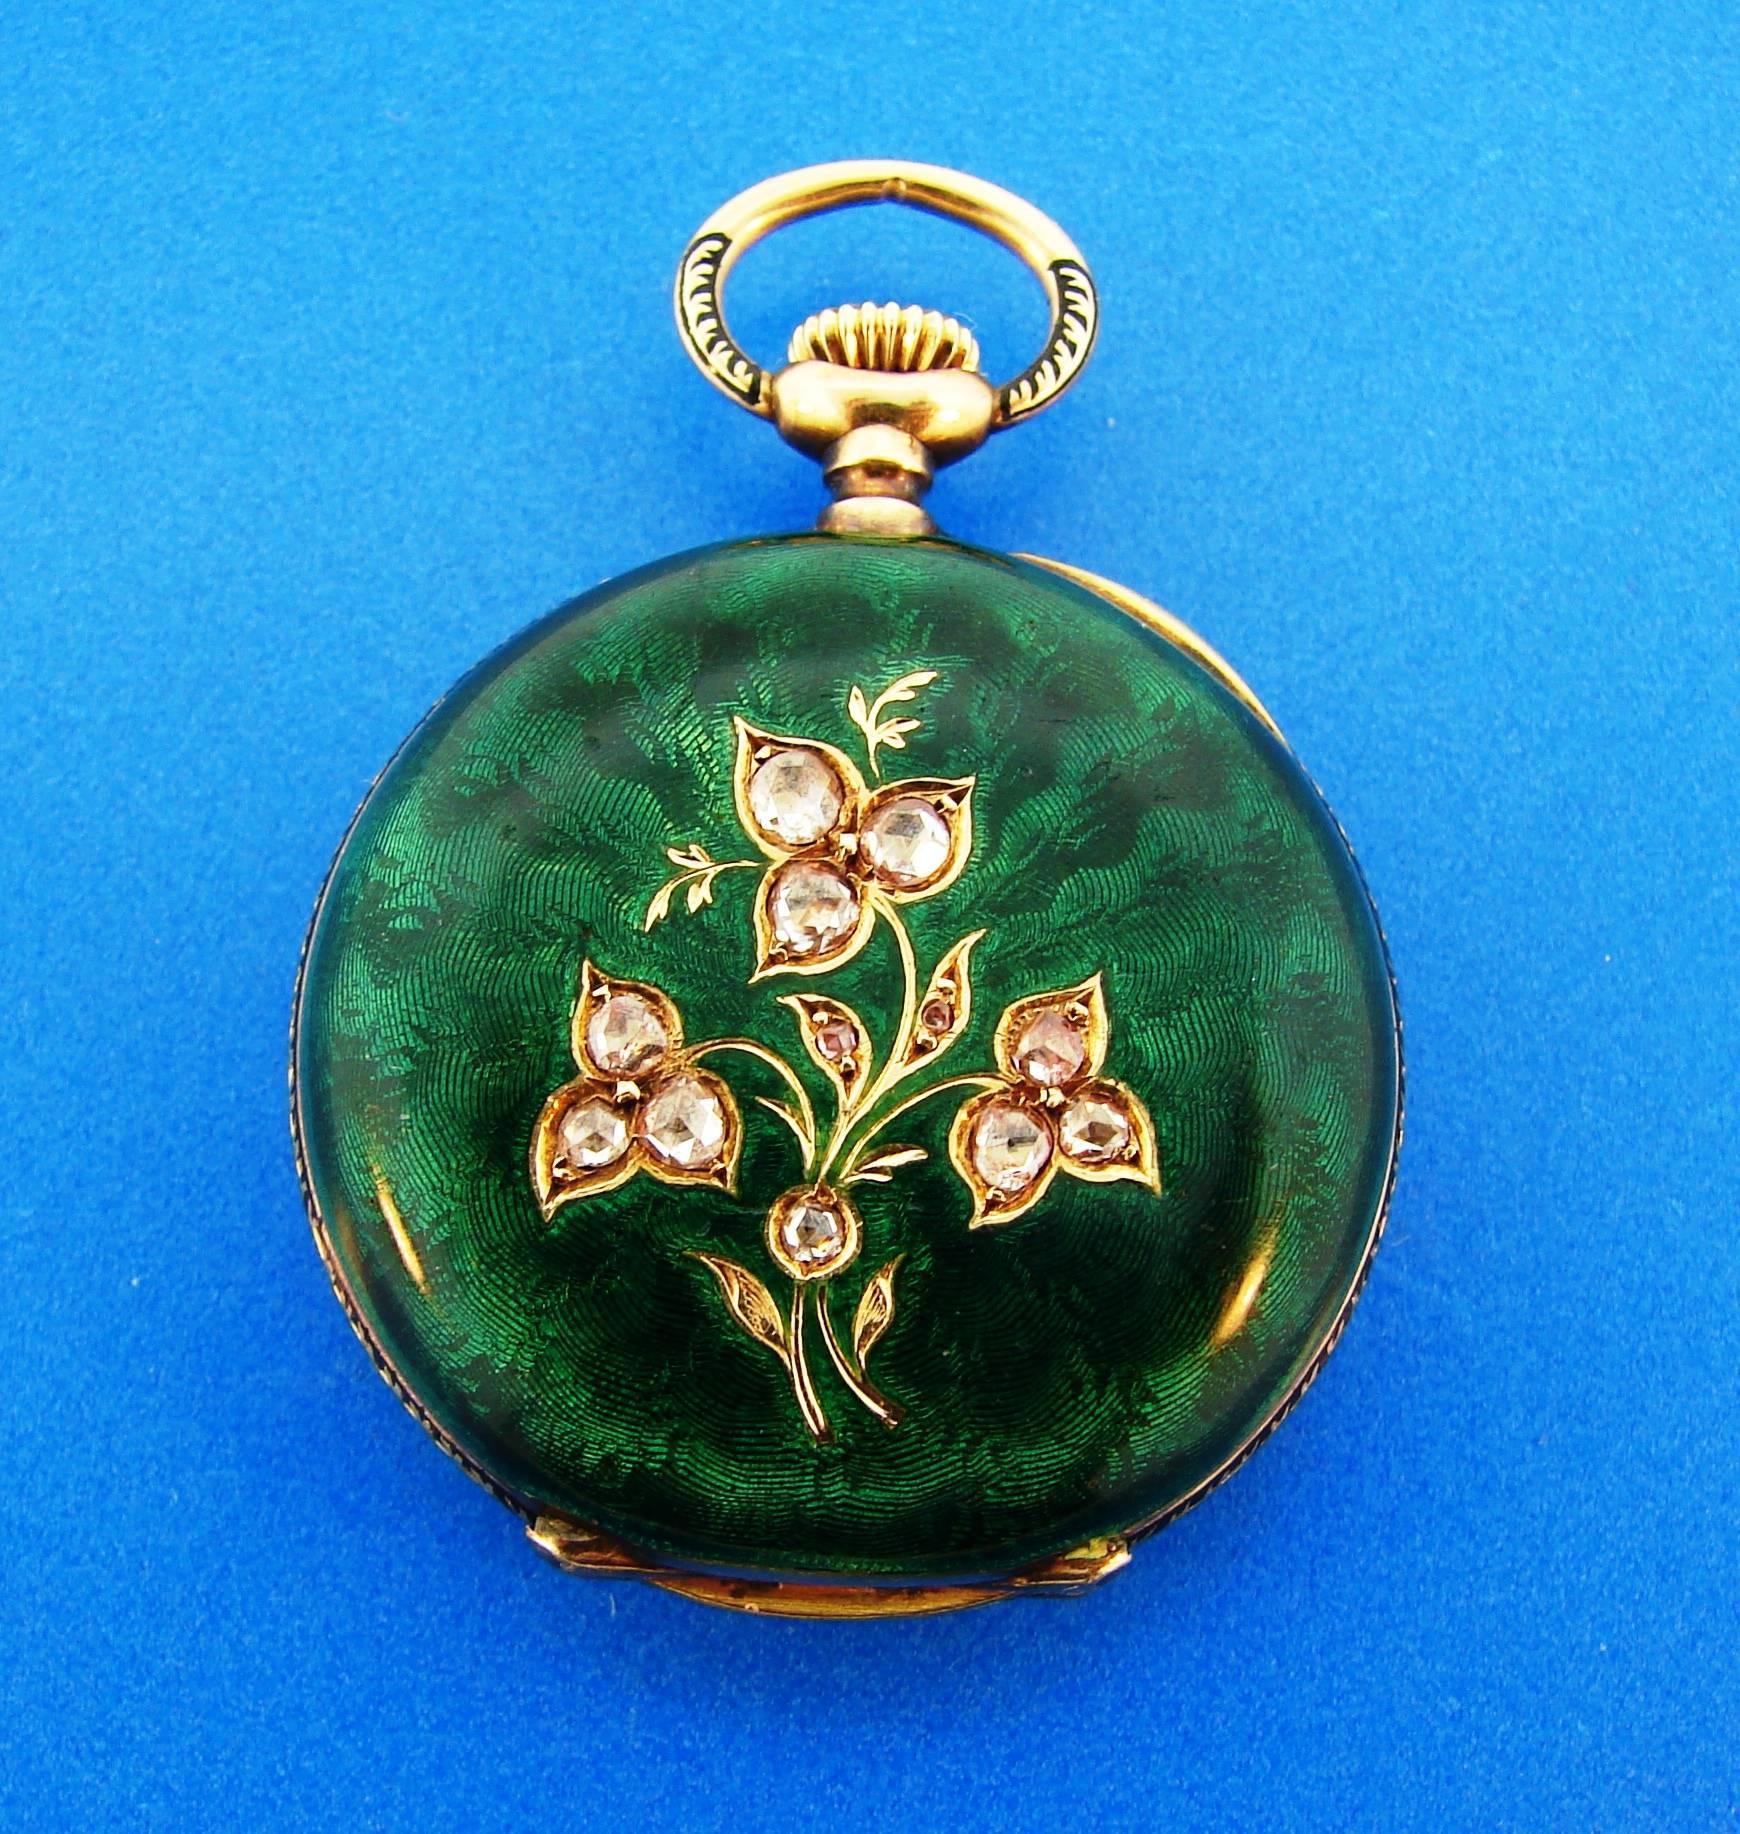 Lovely enameled pocket watch/pendant created by Tiffany & Co. in the 1900's. It is made of 18 karat yellow gold, green enamel and accented with rose cut diamonds. The quality of enameling is outstanding!
The watch is manual-wind, mechanical,